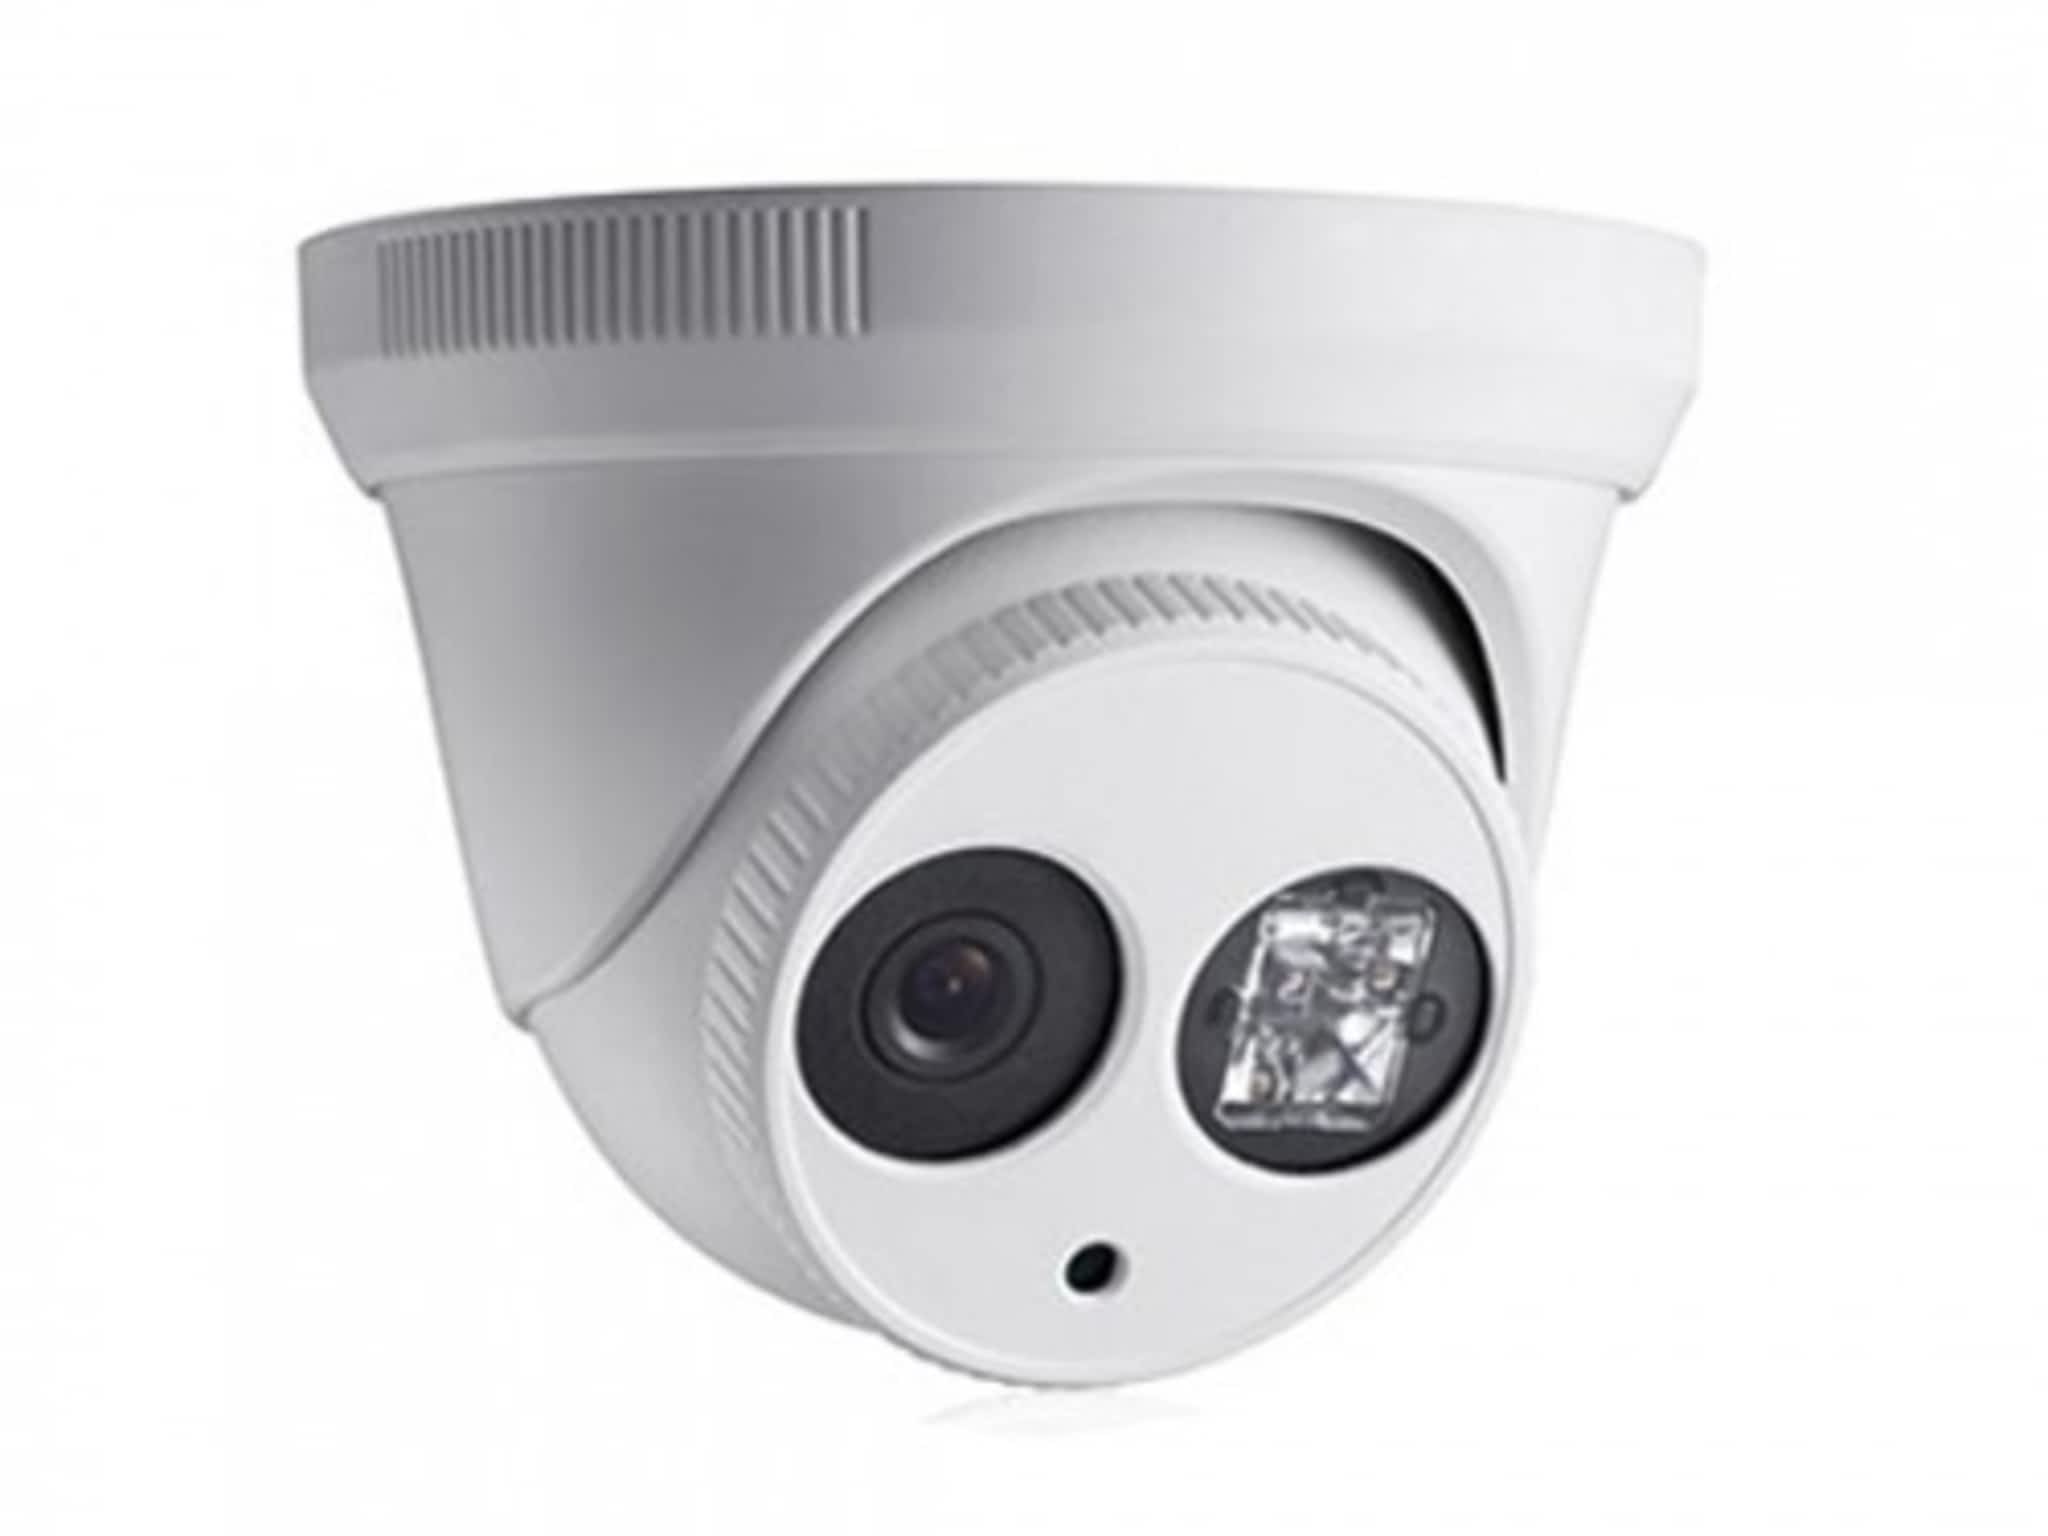 photo IRS Security Systems